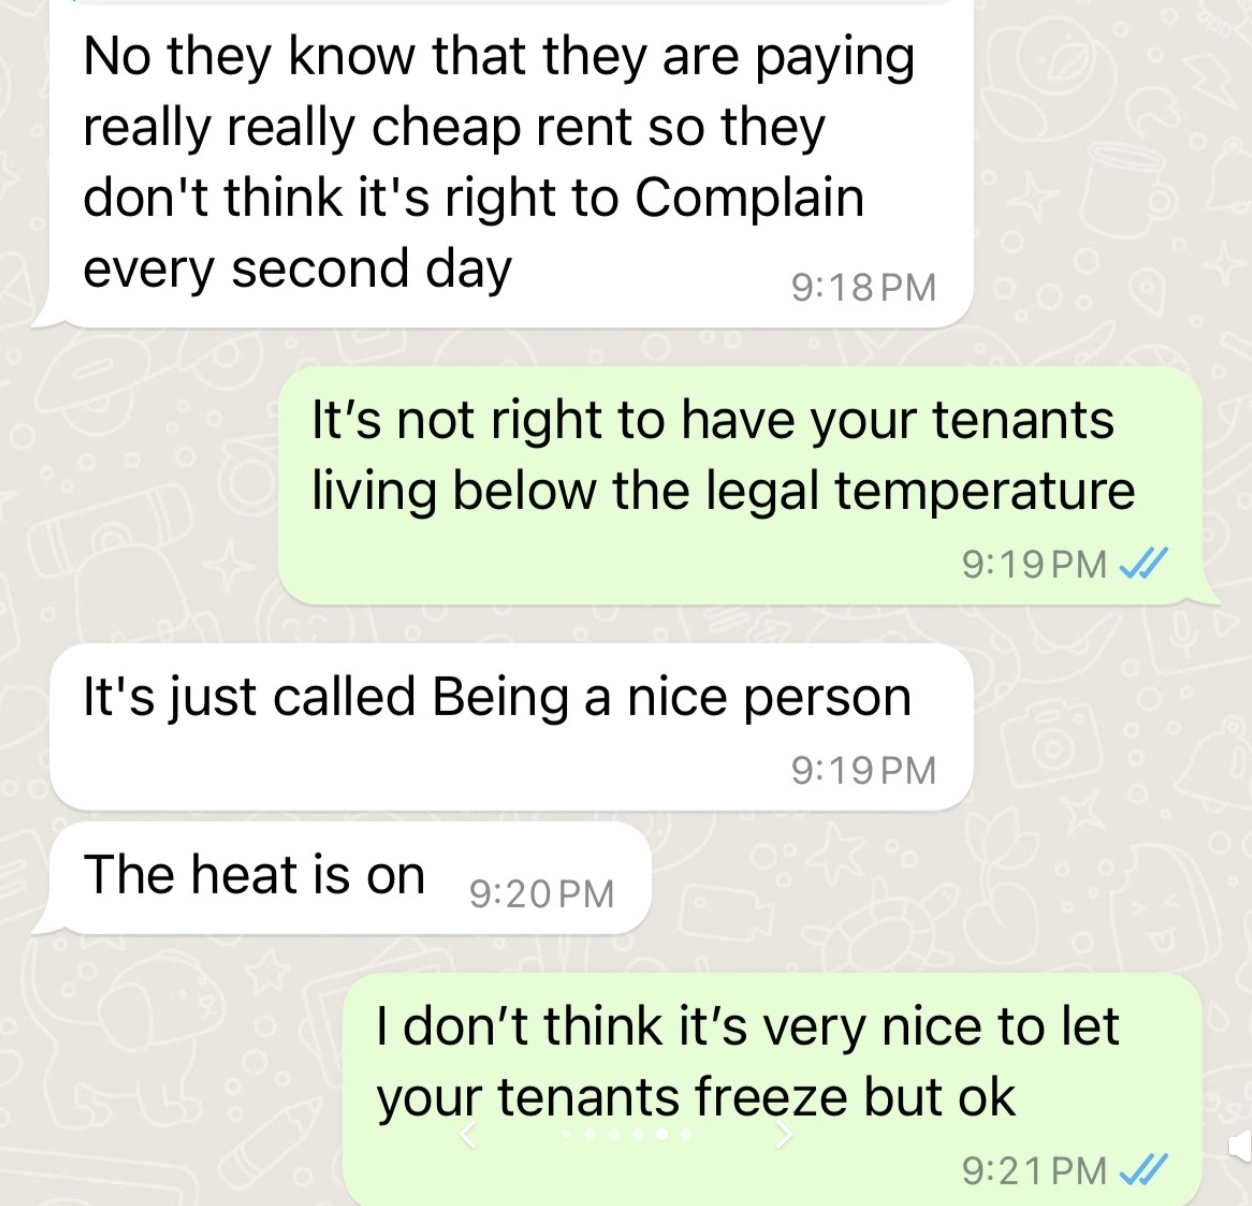 document - No they know that they are paying really really cheap rent so they don't think it's right to Complain every second day It's not right to have your tenants living below the legal temperature It's just called Being a nice person The heat is on I 